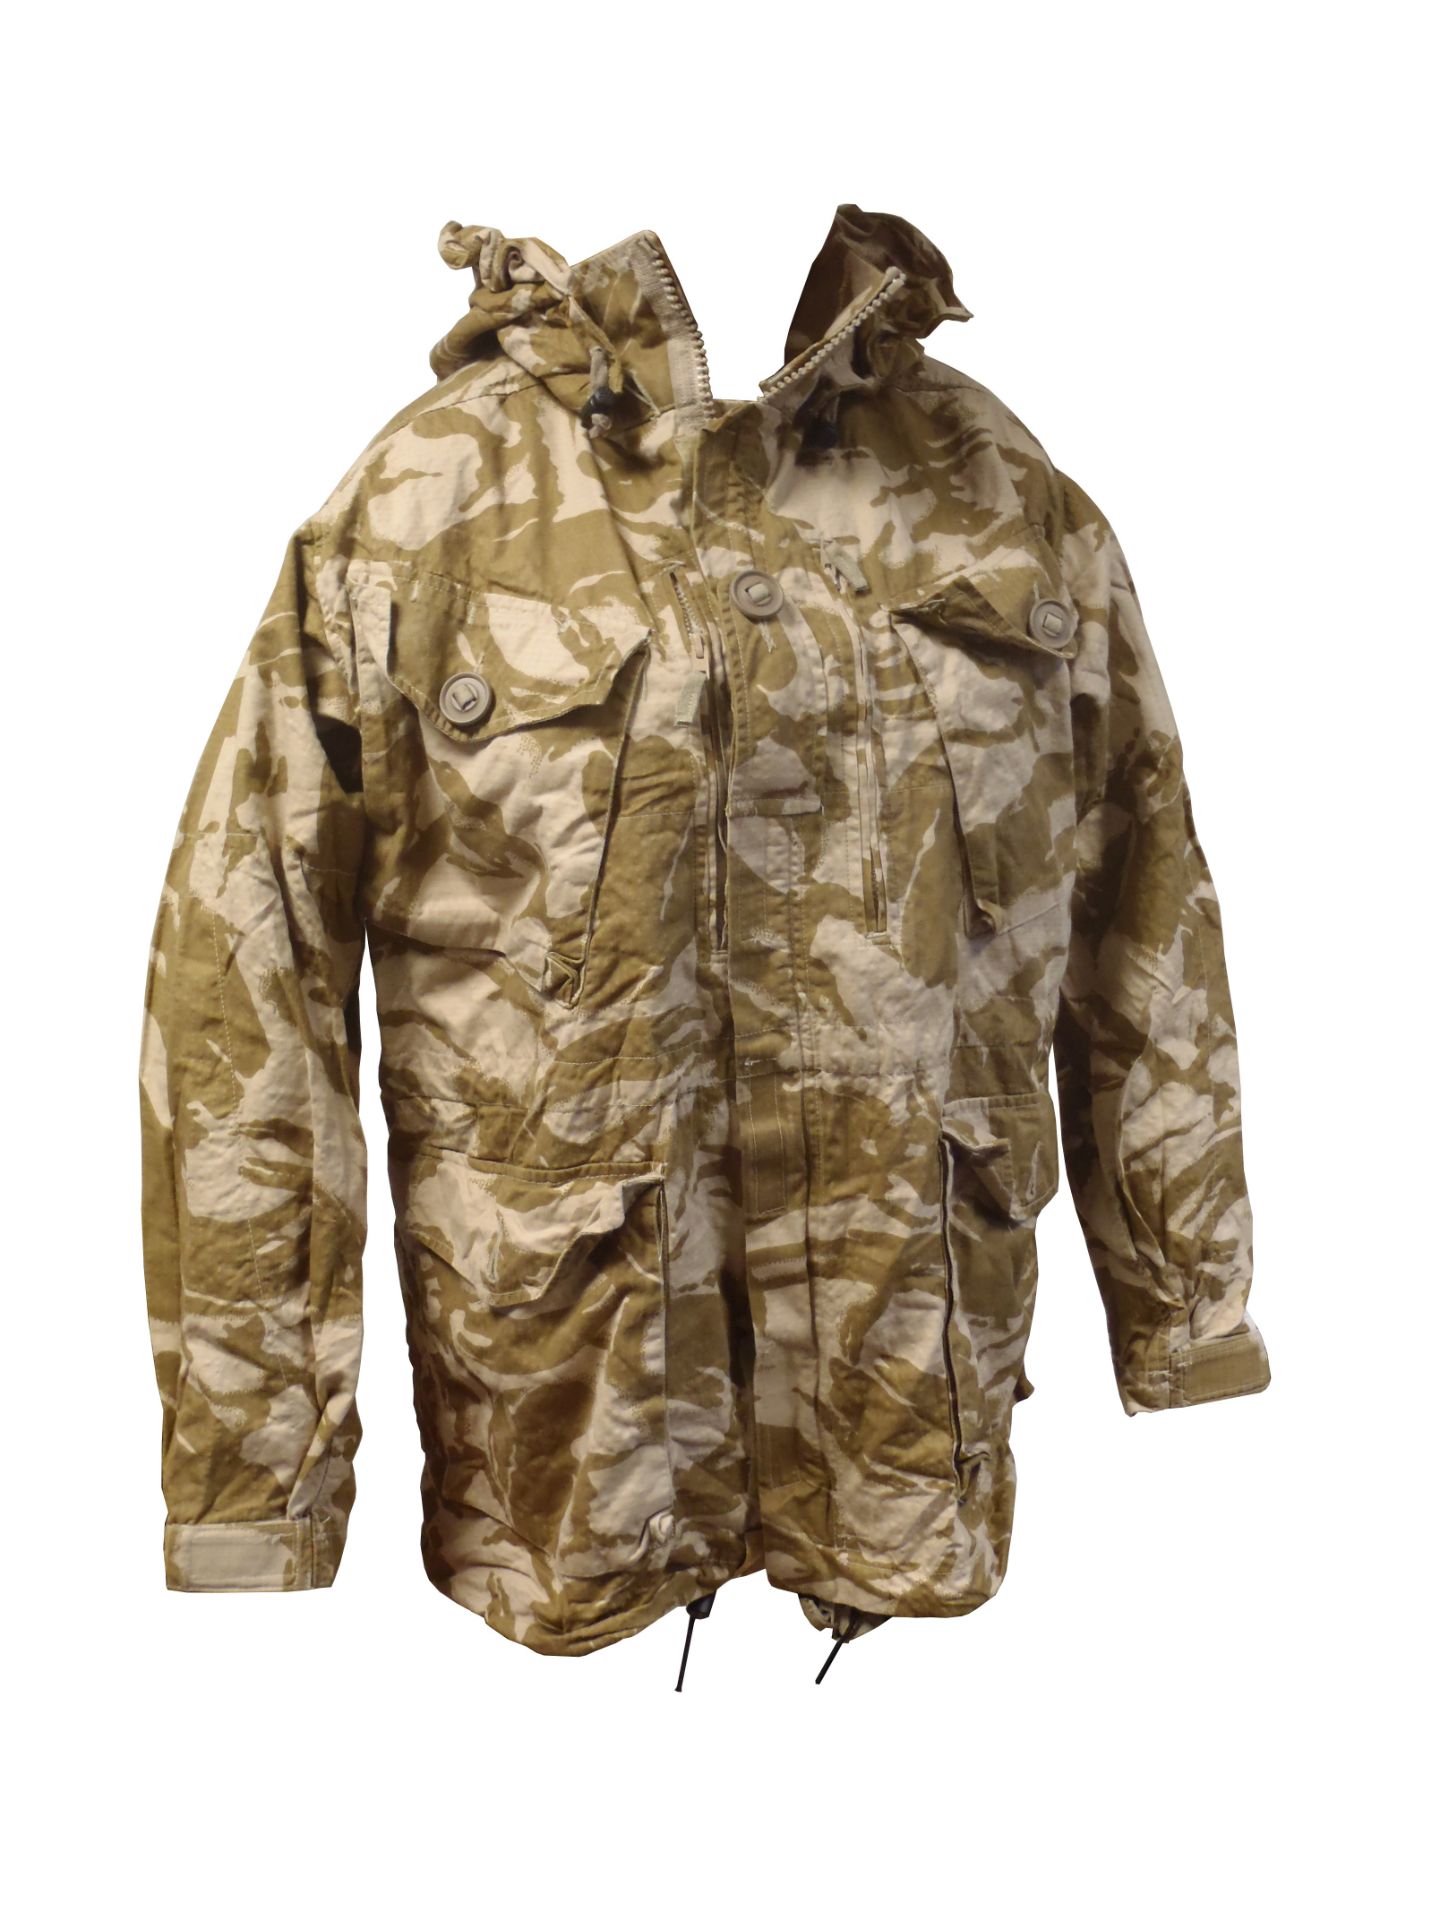 PACK OF 5 Desert Ripstop Jacket - Grade 1 - Mix of Sizes